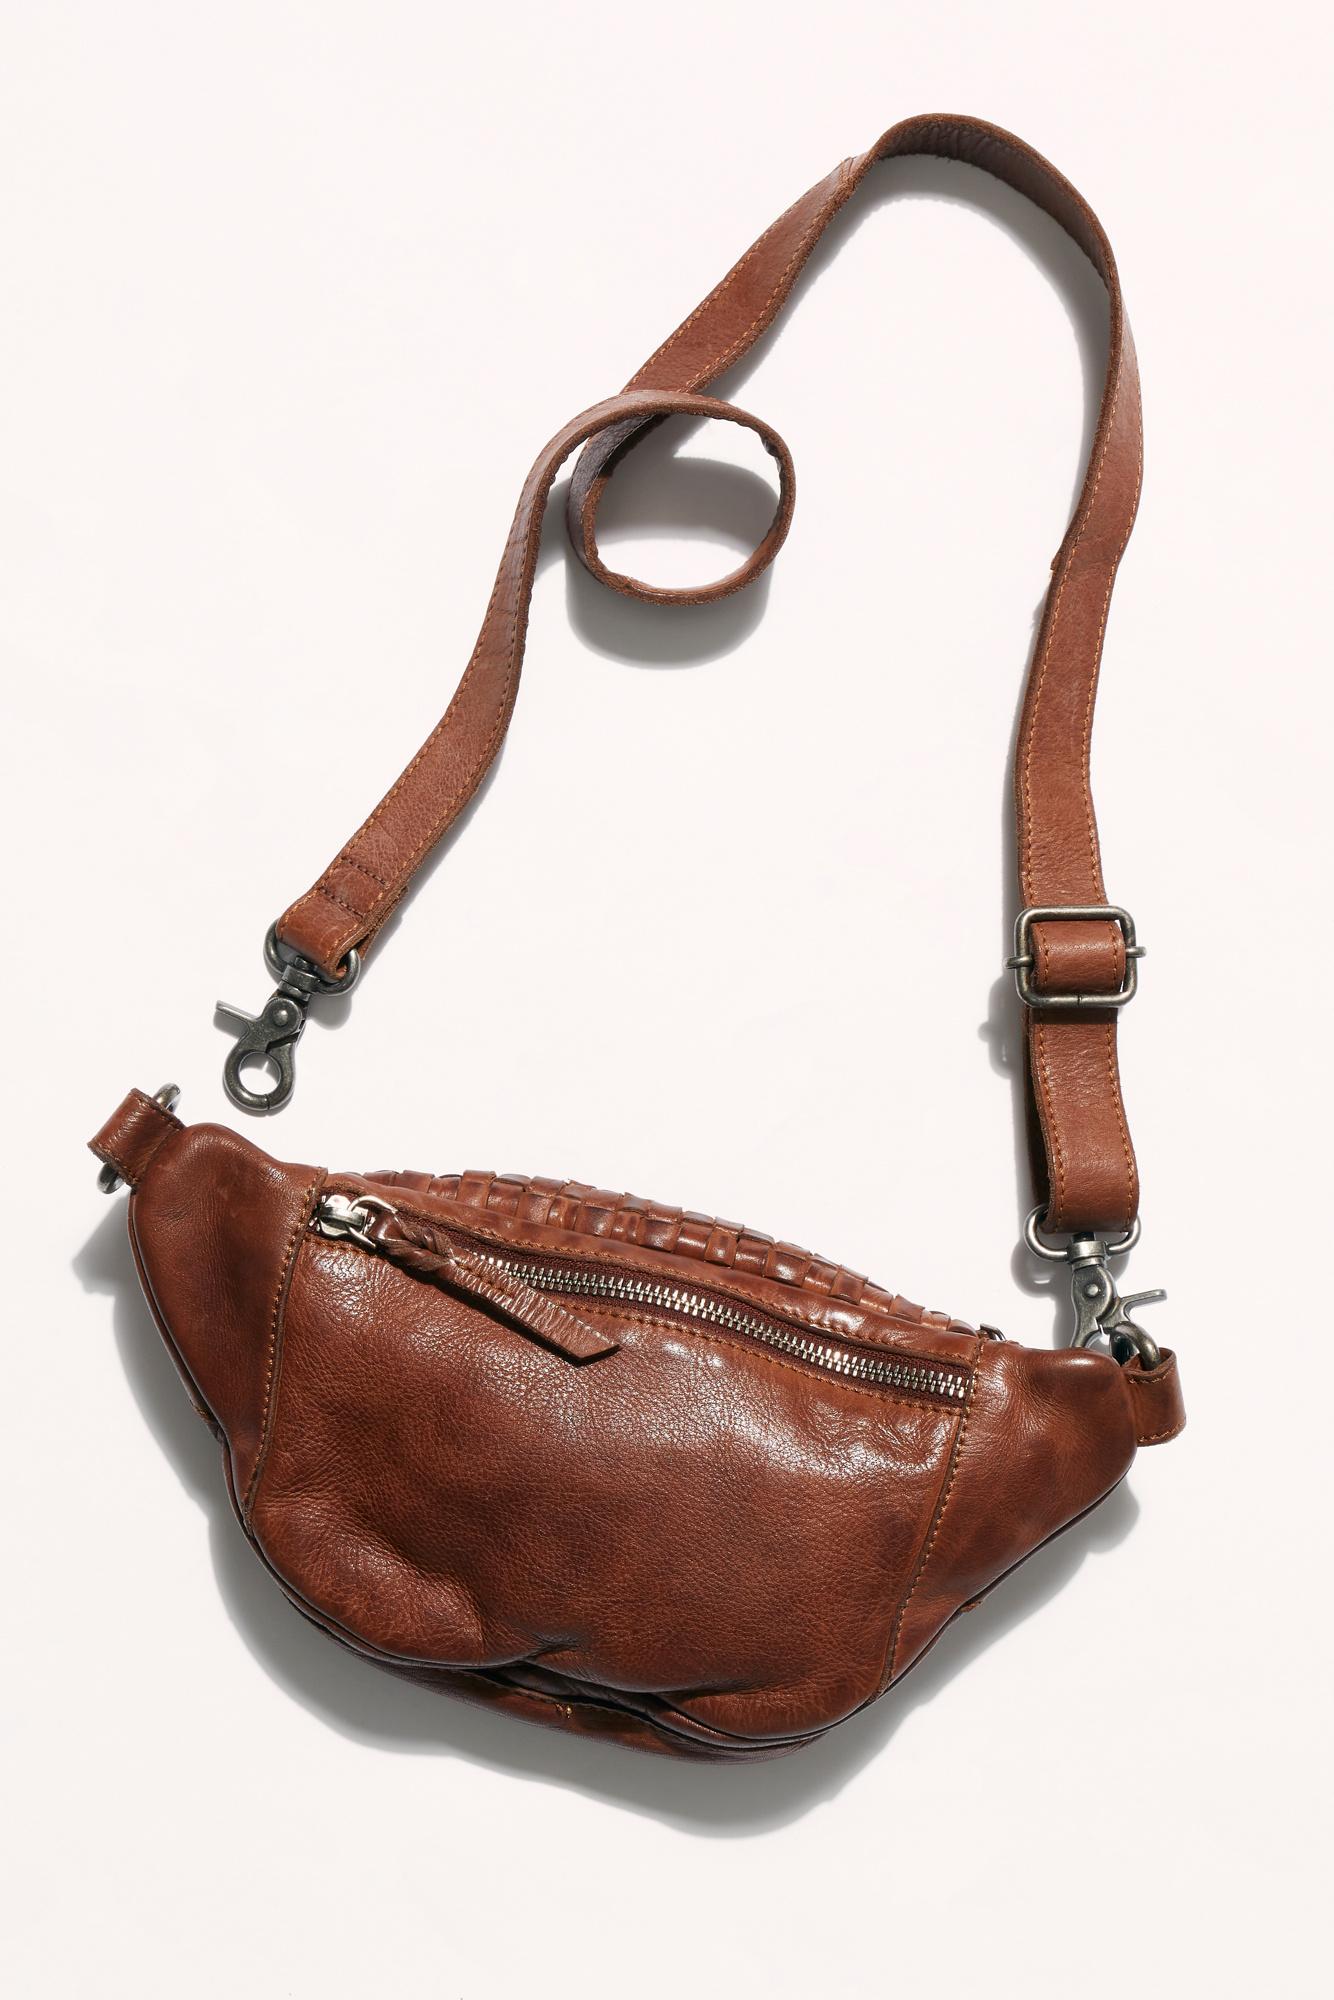 Knitted PU Leather Waist Bags For Women Weaving Design Fanny Pack